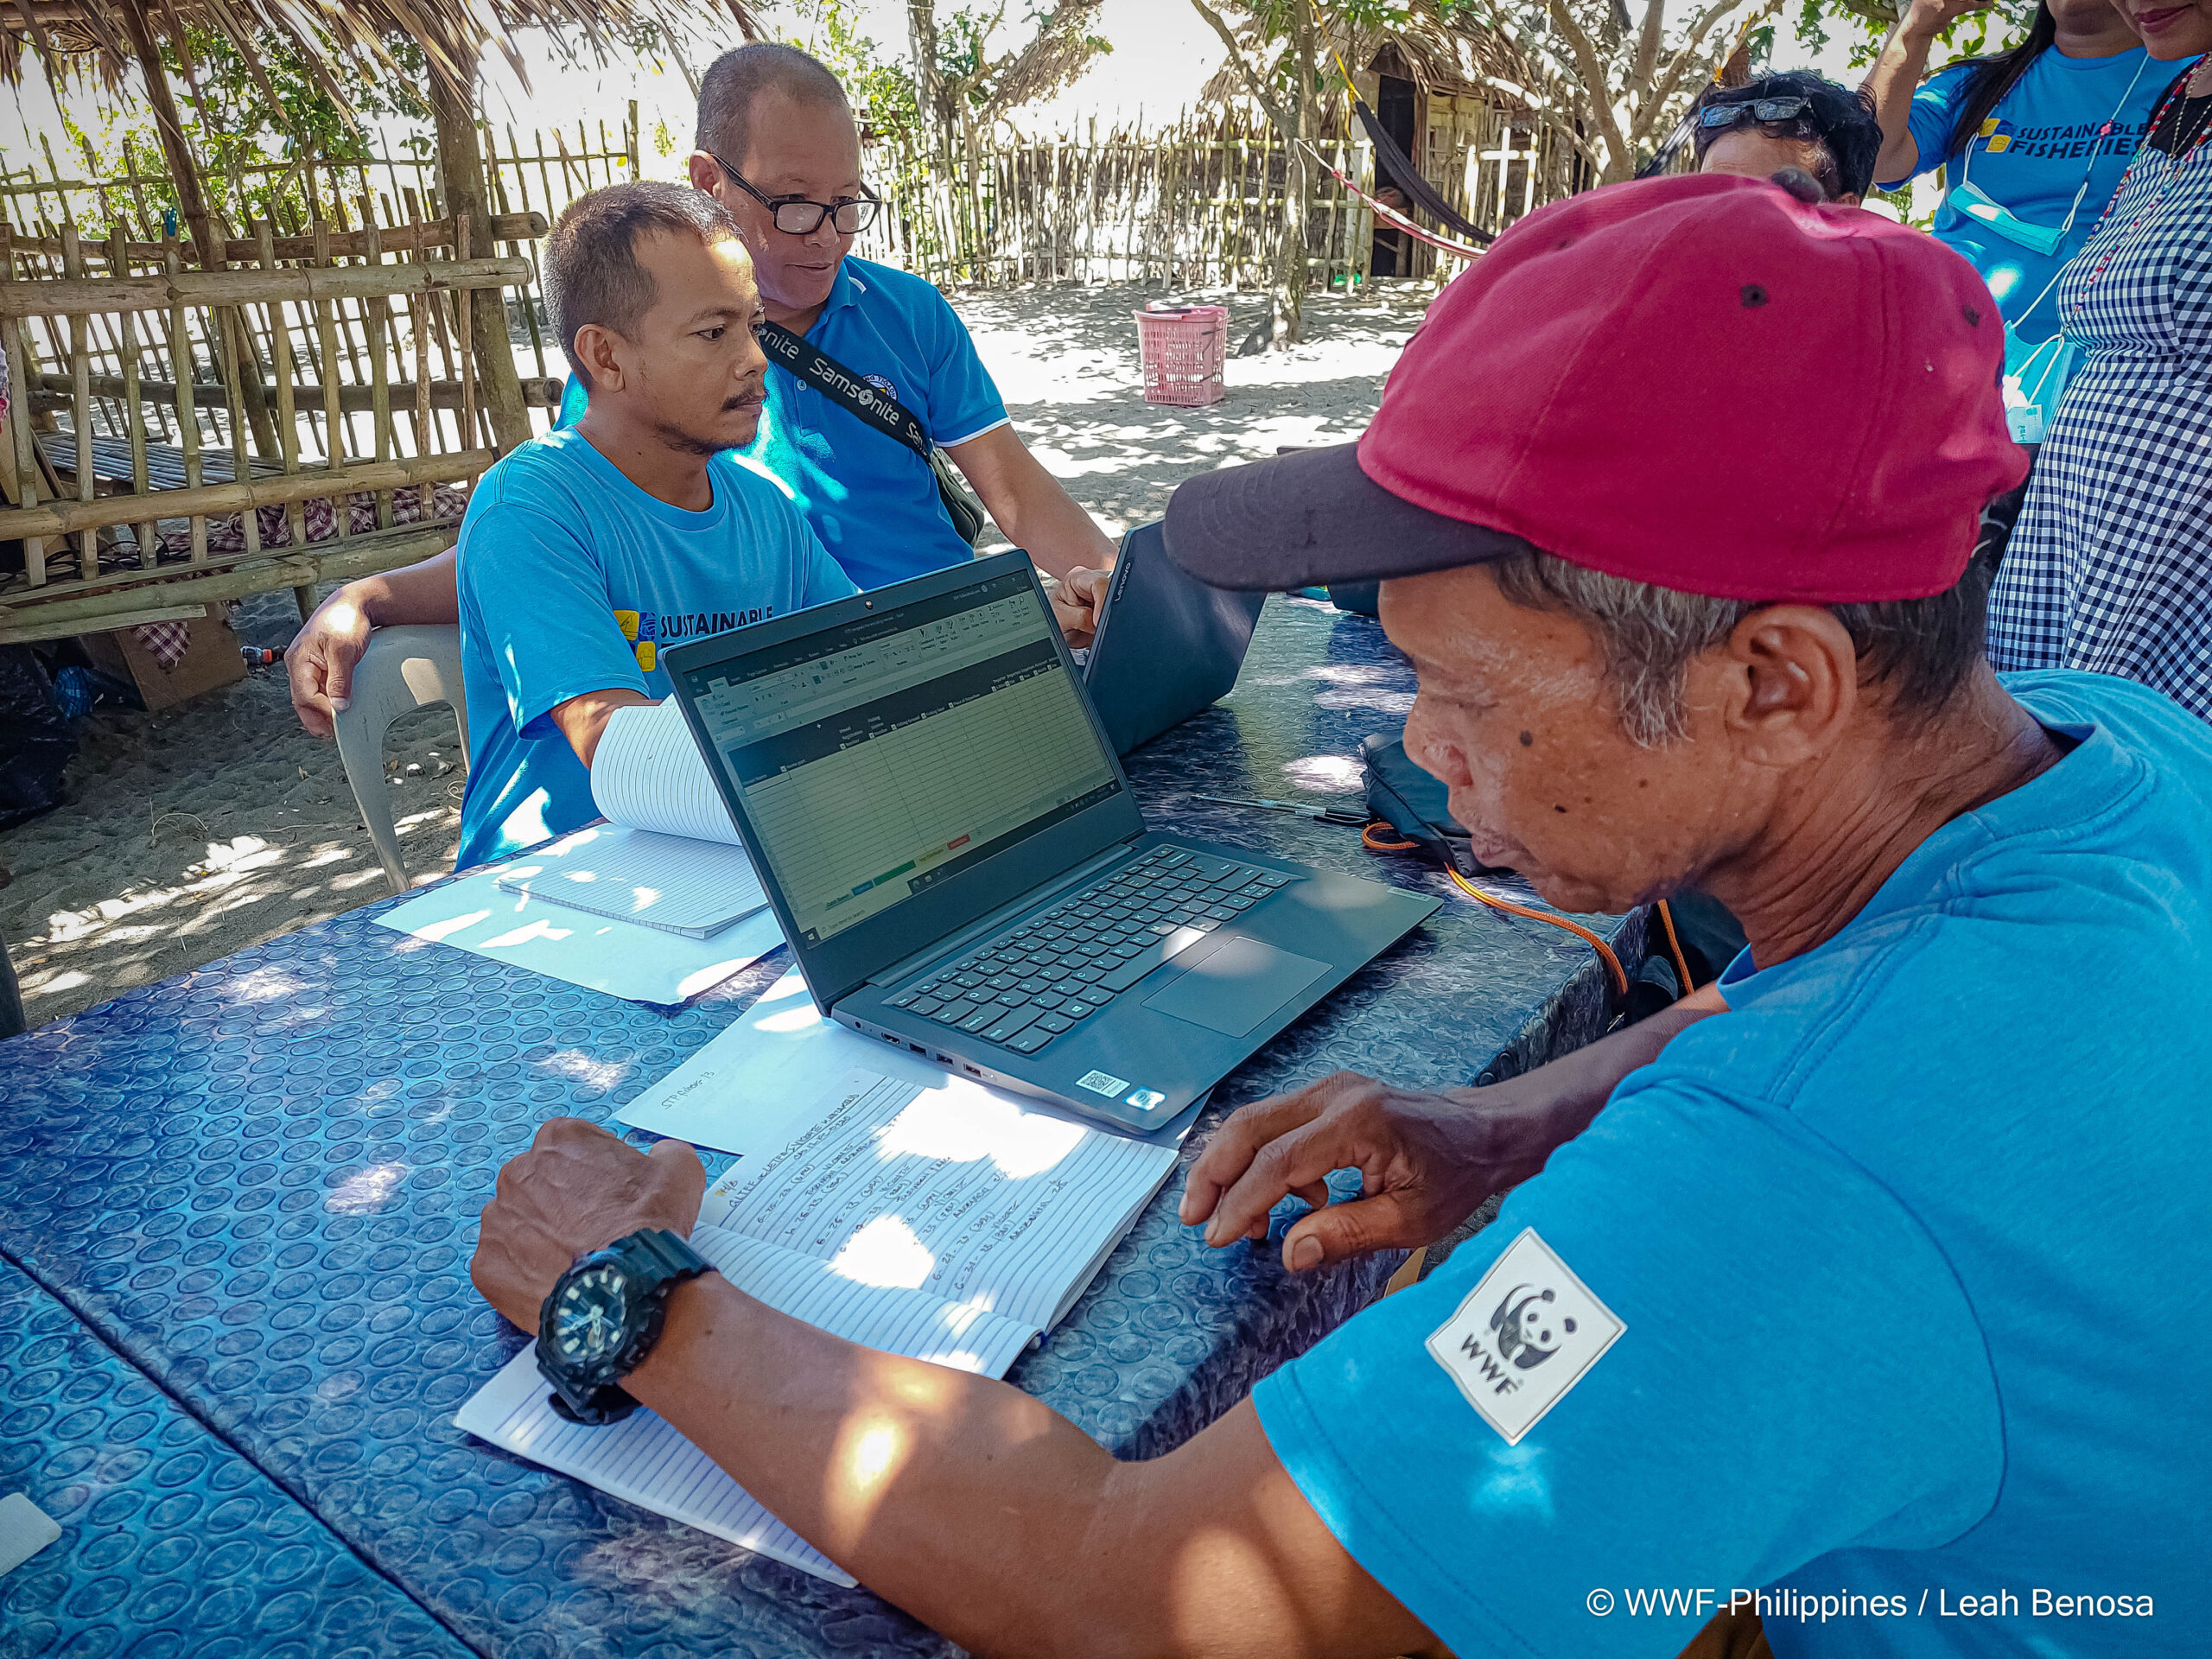 FIsherfolk digitize their fish catch data. WWF-Philippines is working to improve fish catch reporting among its partner fishers by establishing a database of data.